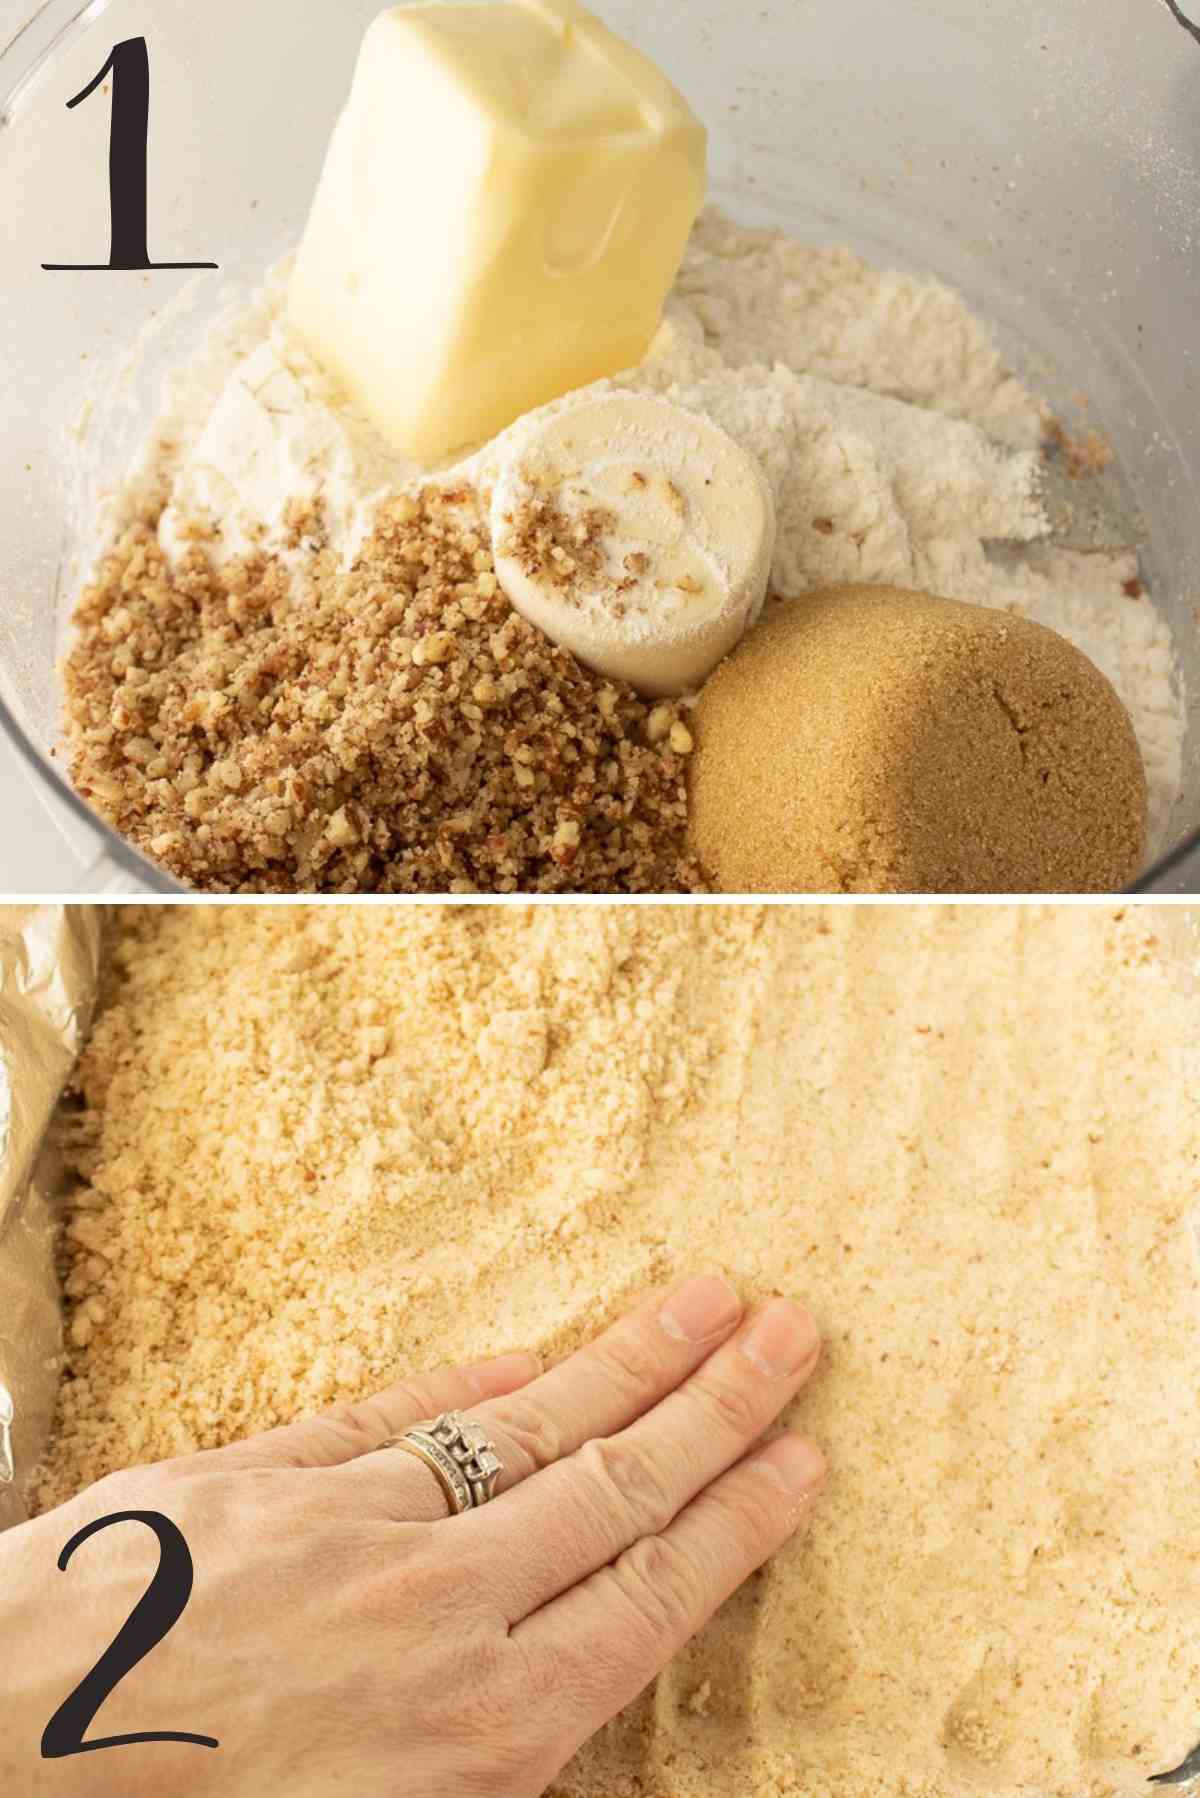 Crust ingredients in a food processor and then being pressed into the baking dish.